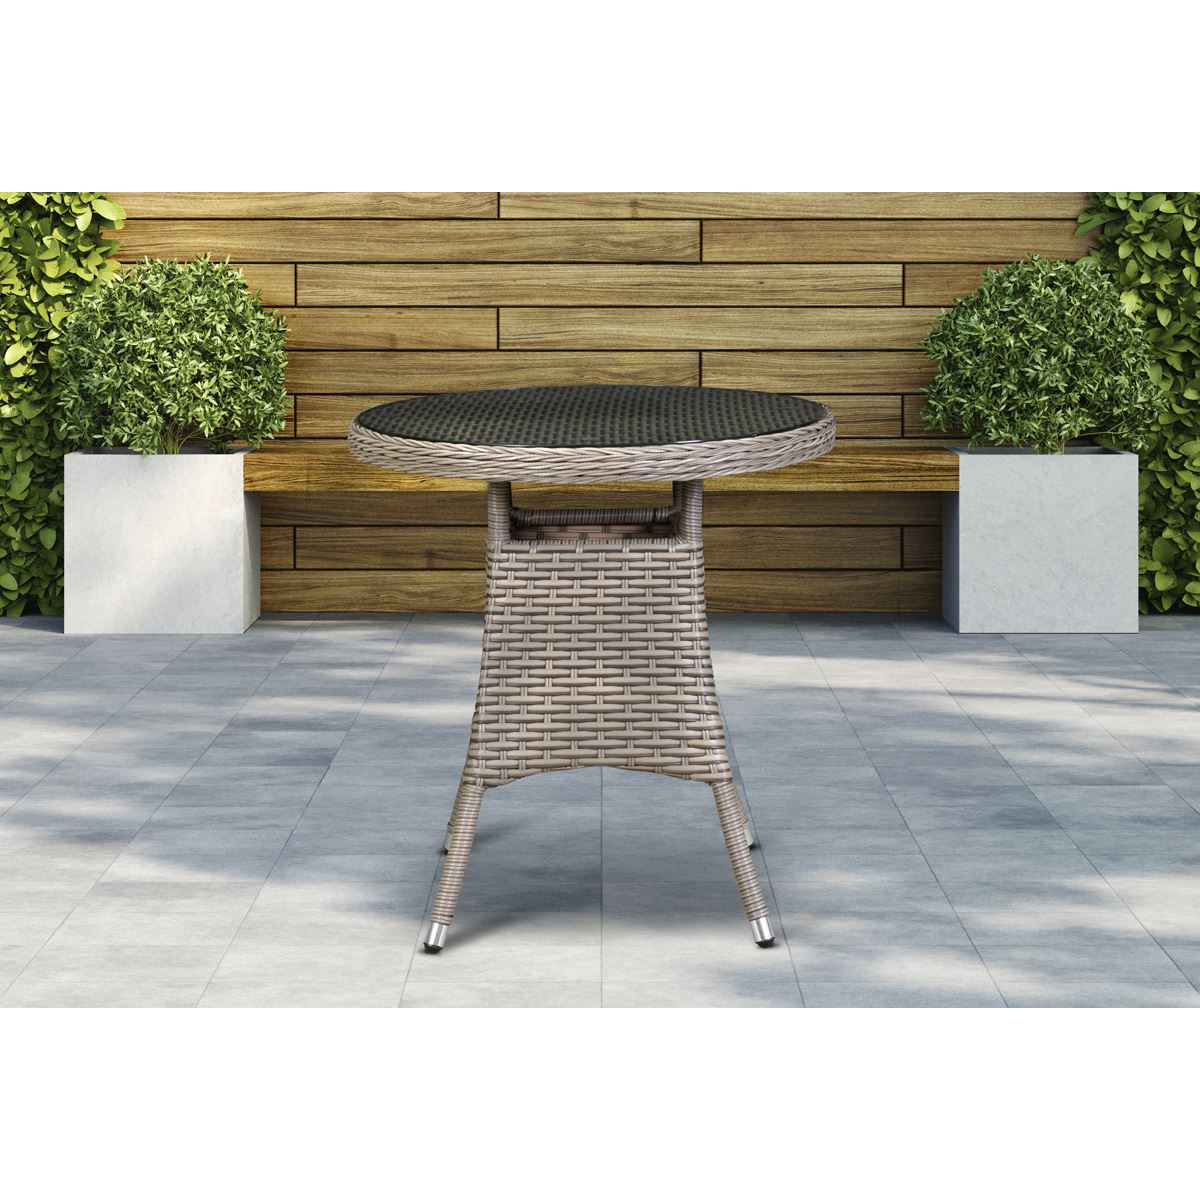 Dellonda Chester Rattan Wicker Outdoor Bistro Table with Tempered Glass Top, Brown